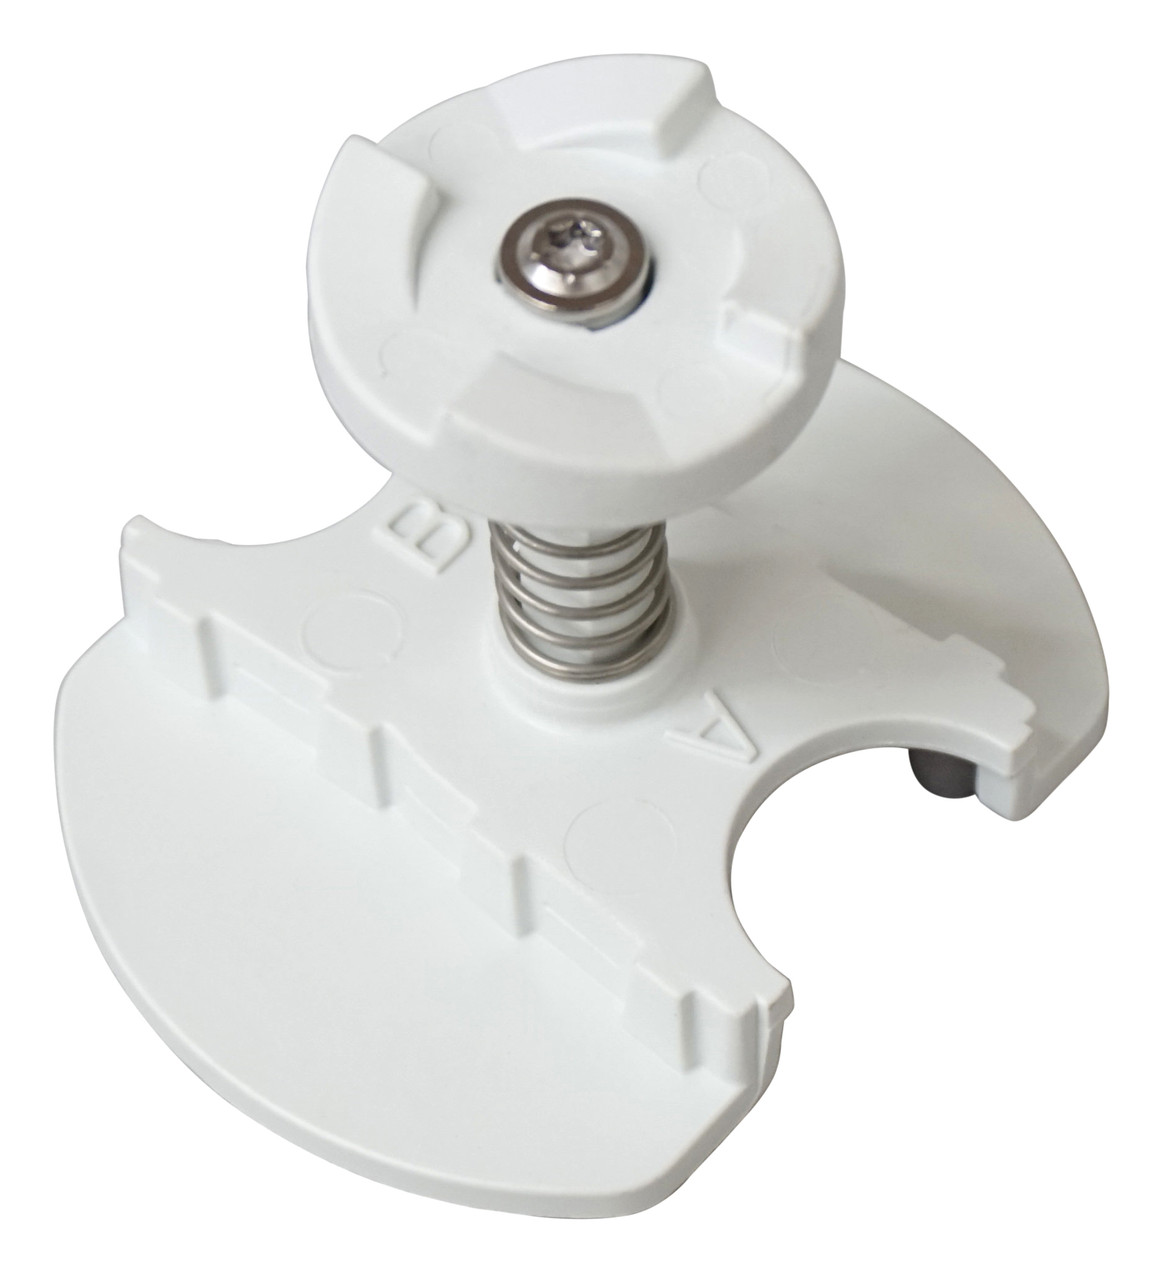 Ice Cream Maker Parts for KitchenAid, As KitchenAid Ice Cream Drive  Attachment, Ice Cream Drive Attachment for KitchenAid, Fit KitchenAid Ice  Cream